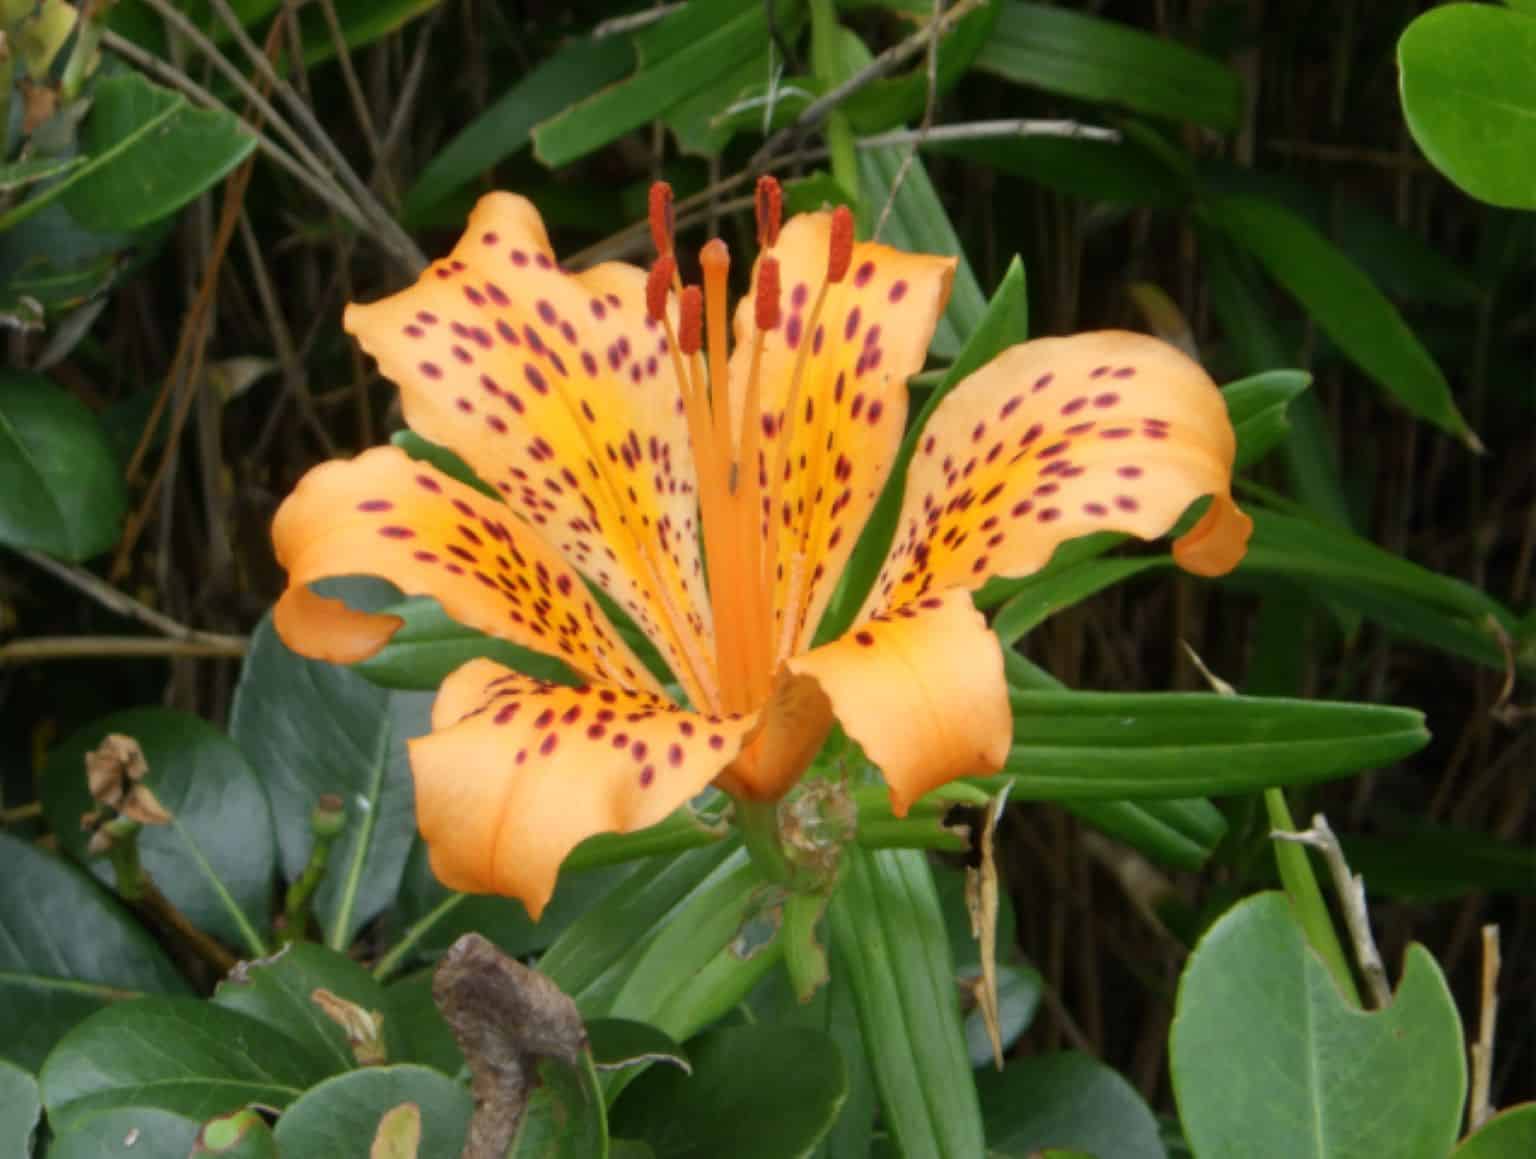 The new species of Japanese lily Lilium pacificum